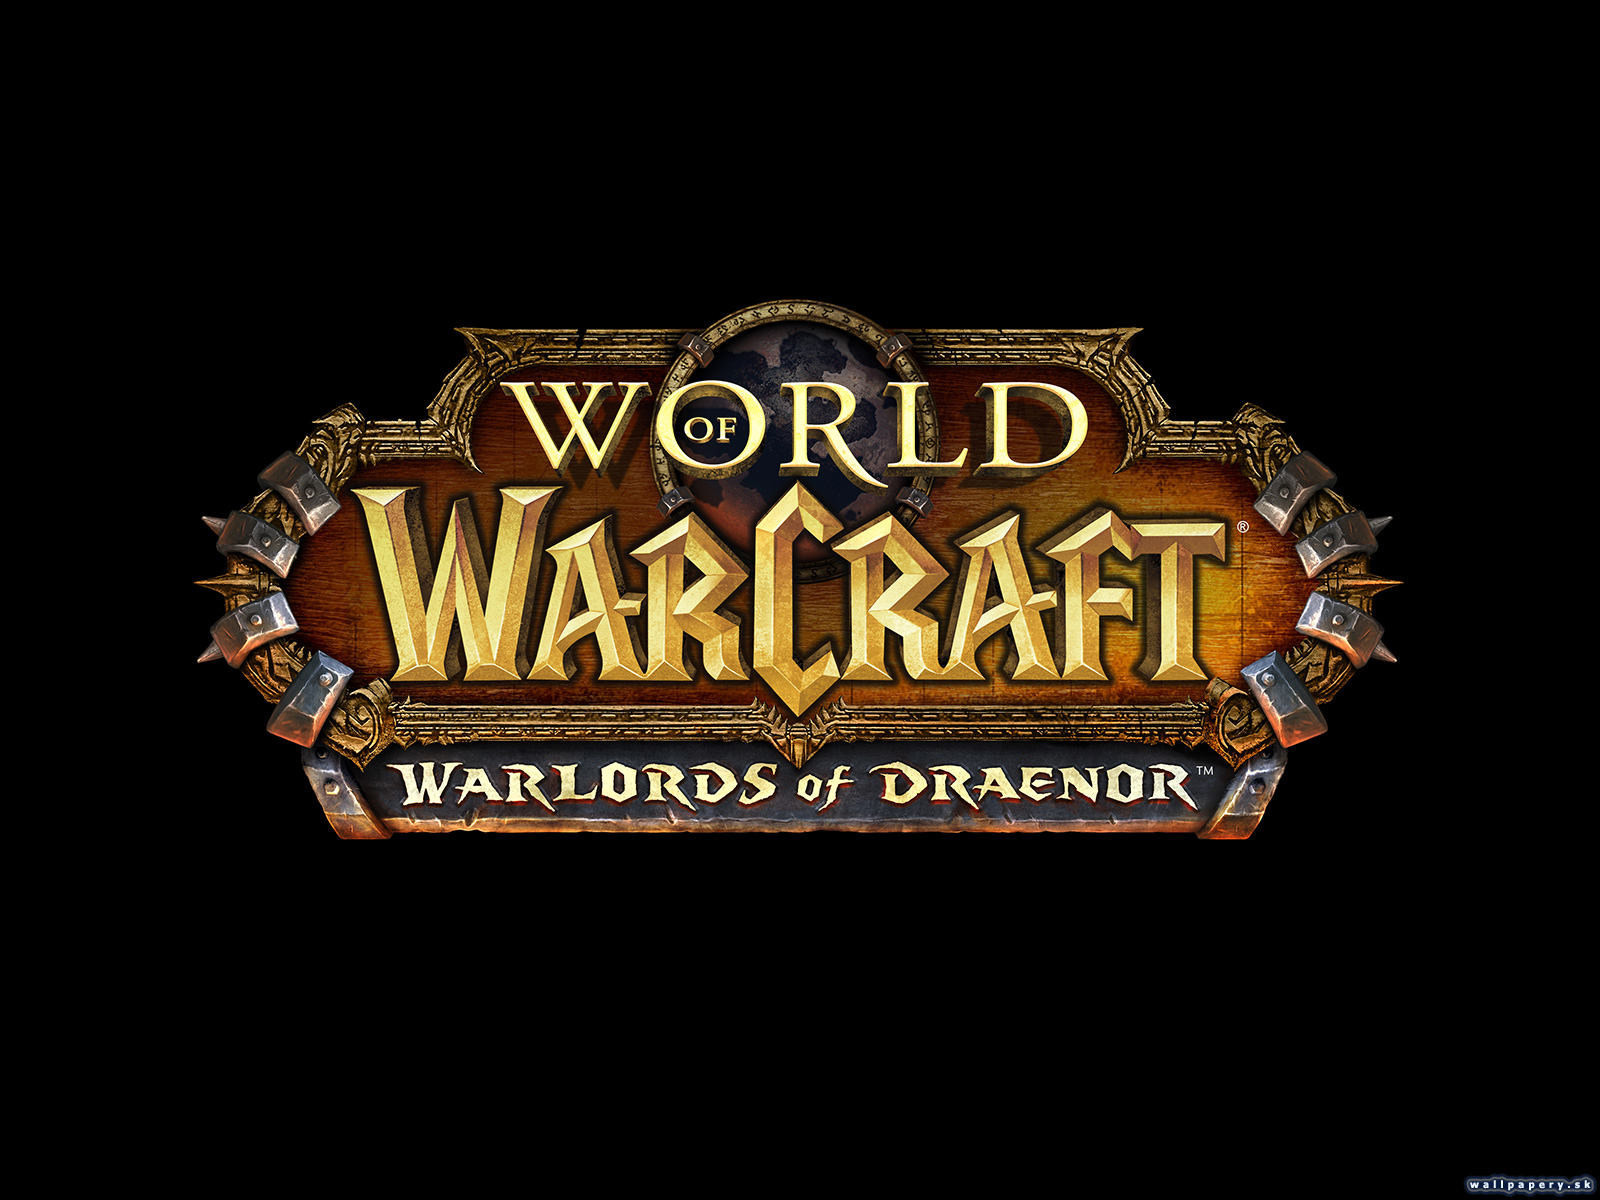 World of Warcraft: Warlords of Draenor - wallpaper 4